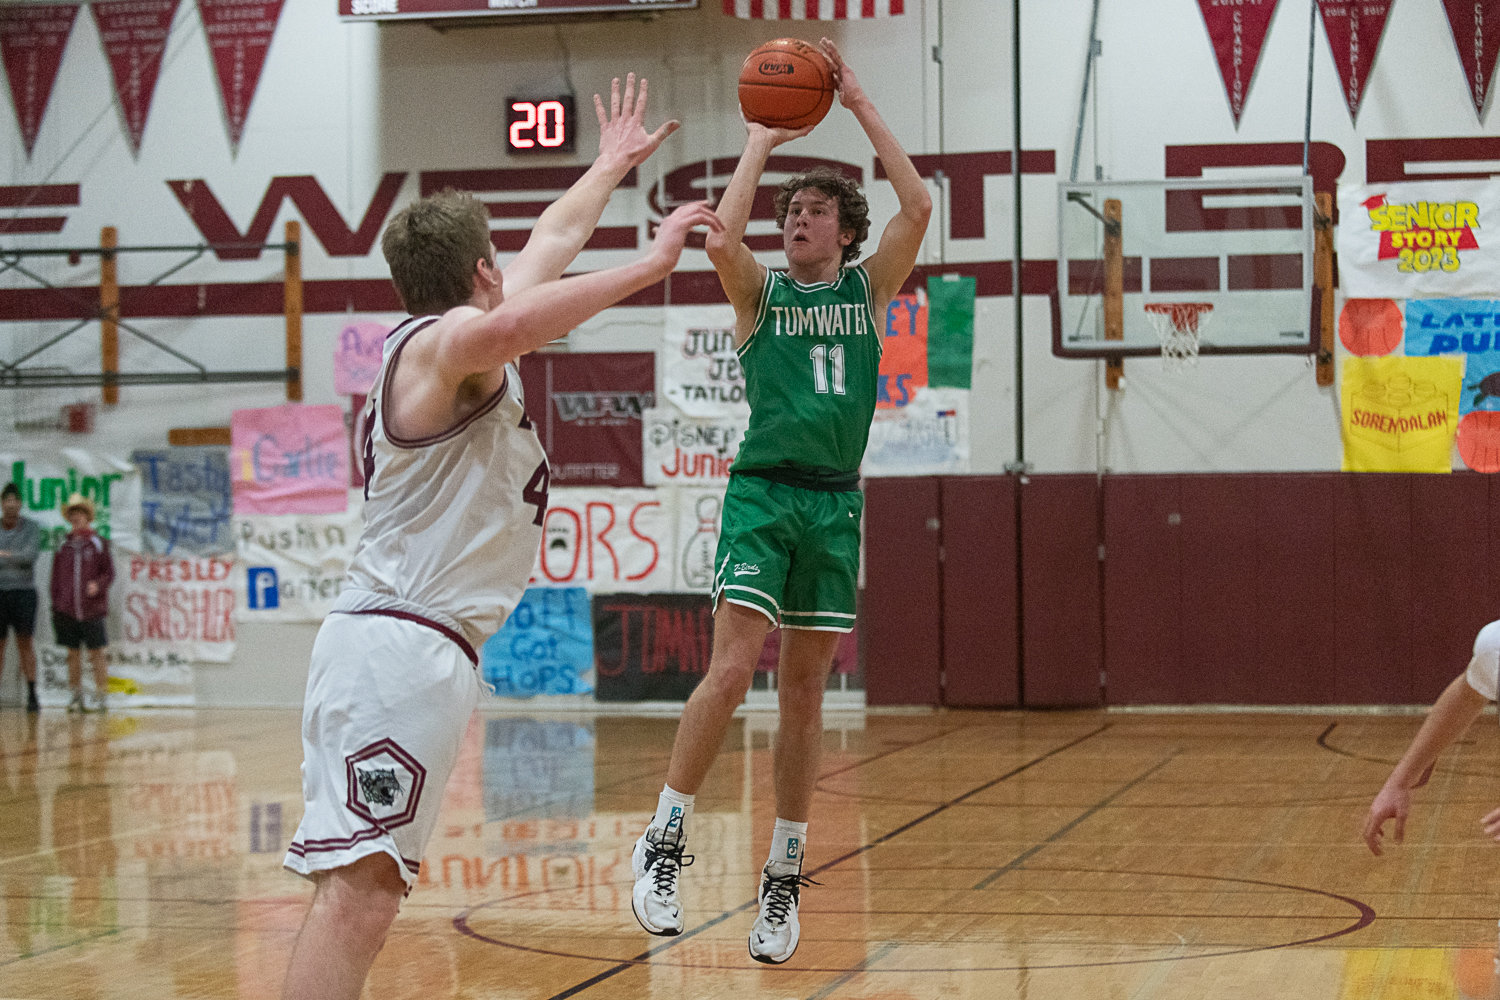 Luke Brewer pulls up for a jumper during the fourth quarter of Tumwater's 71-58 win at W.F. West on Jan. 11.